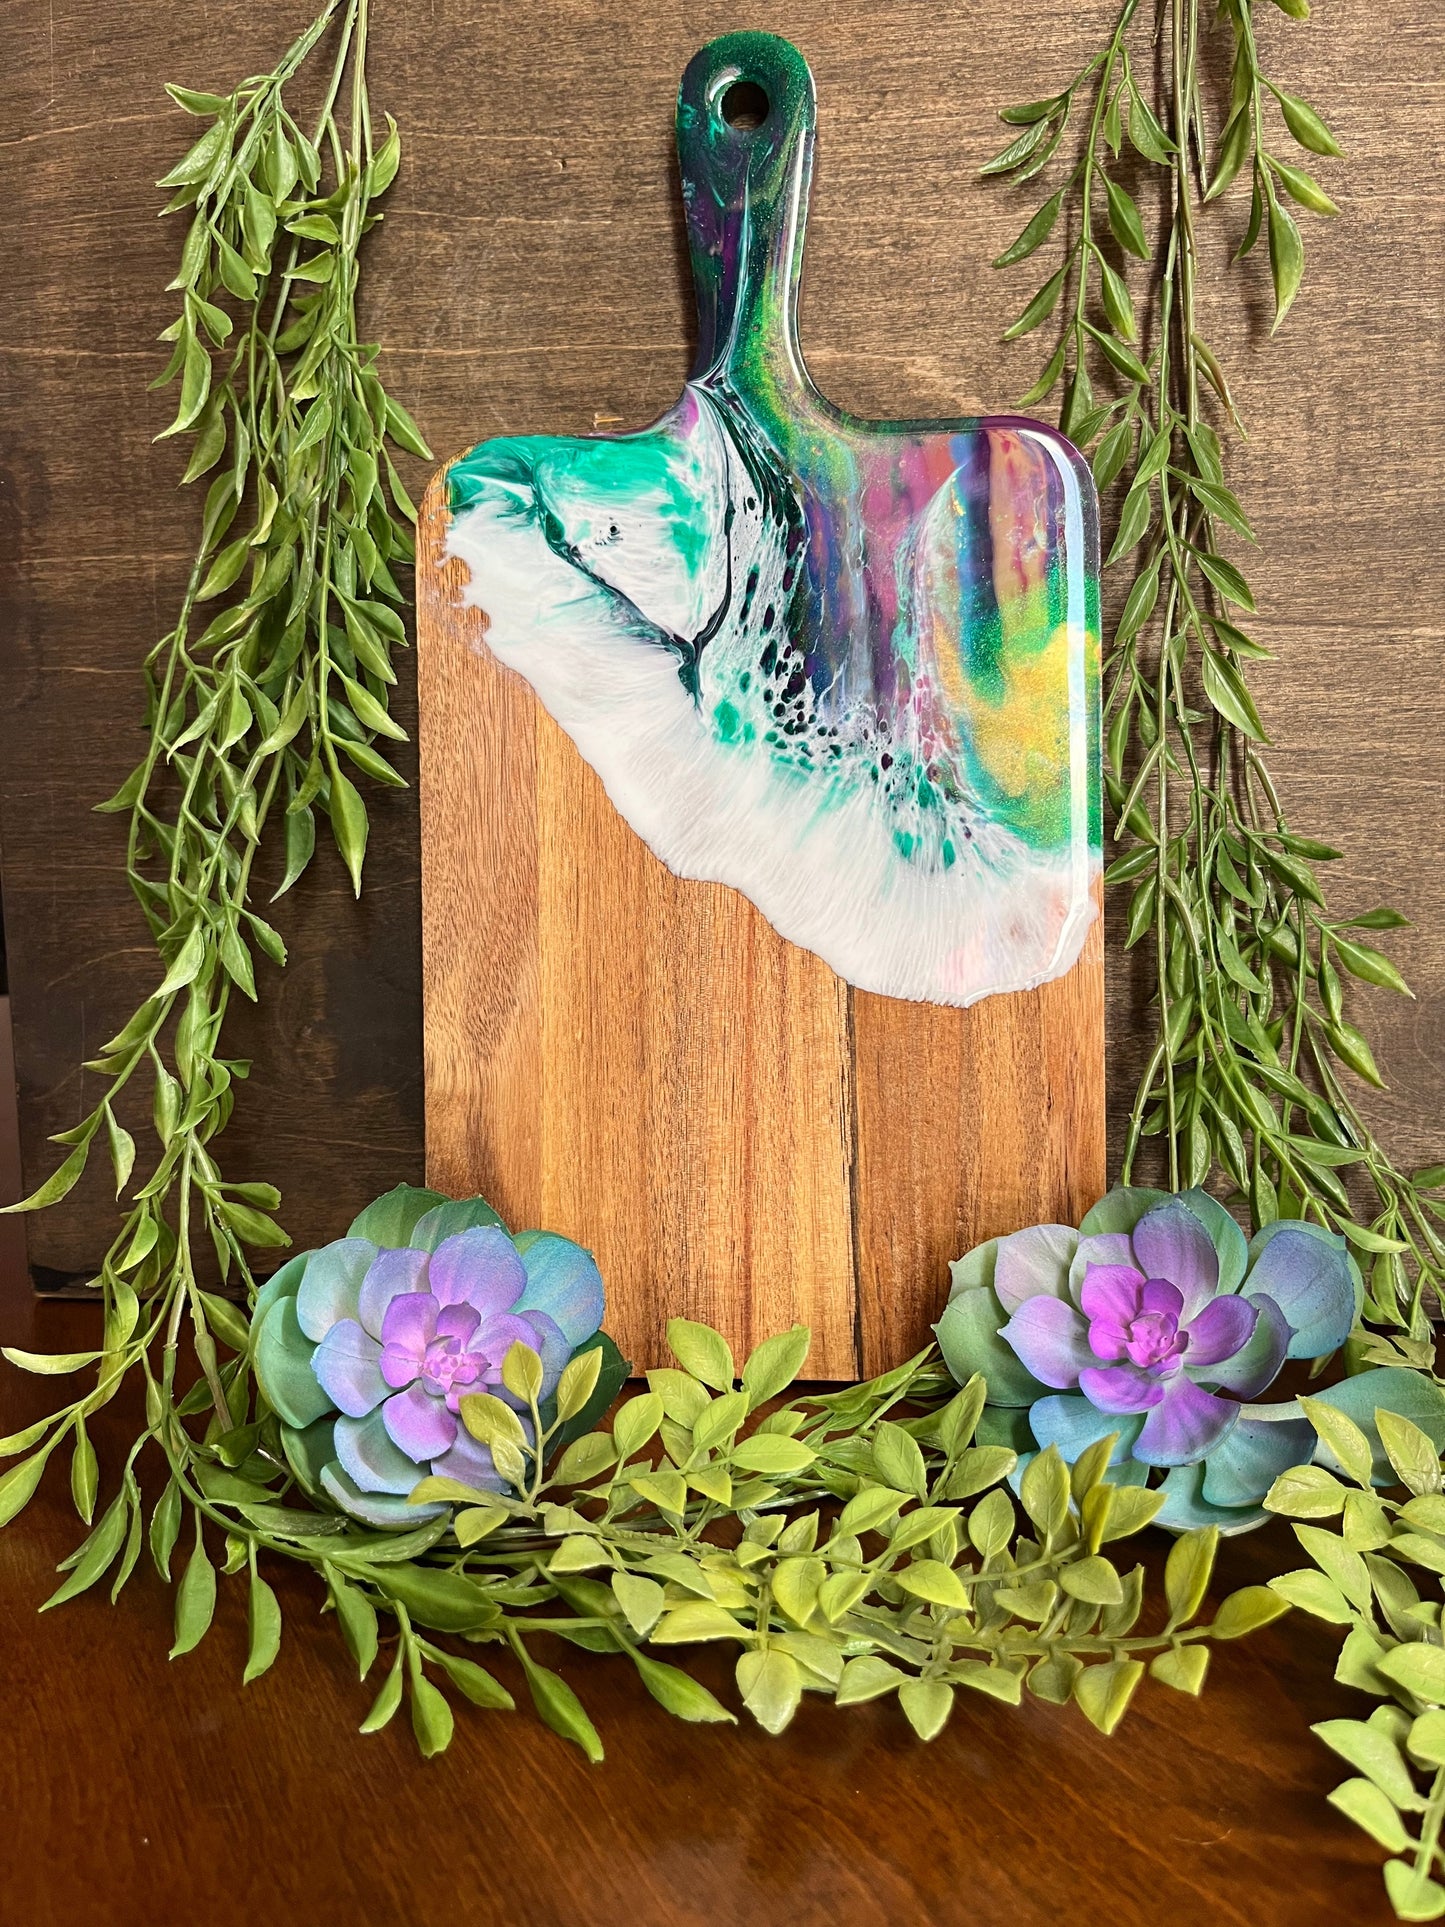 Resin Class - Personal size Cutting board - 8/26 @ 1pm